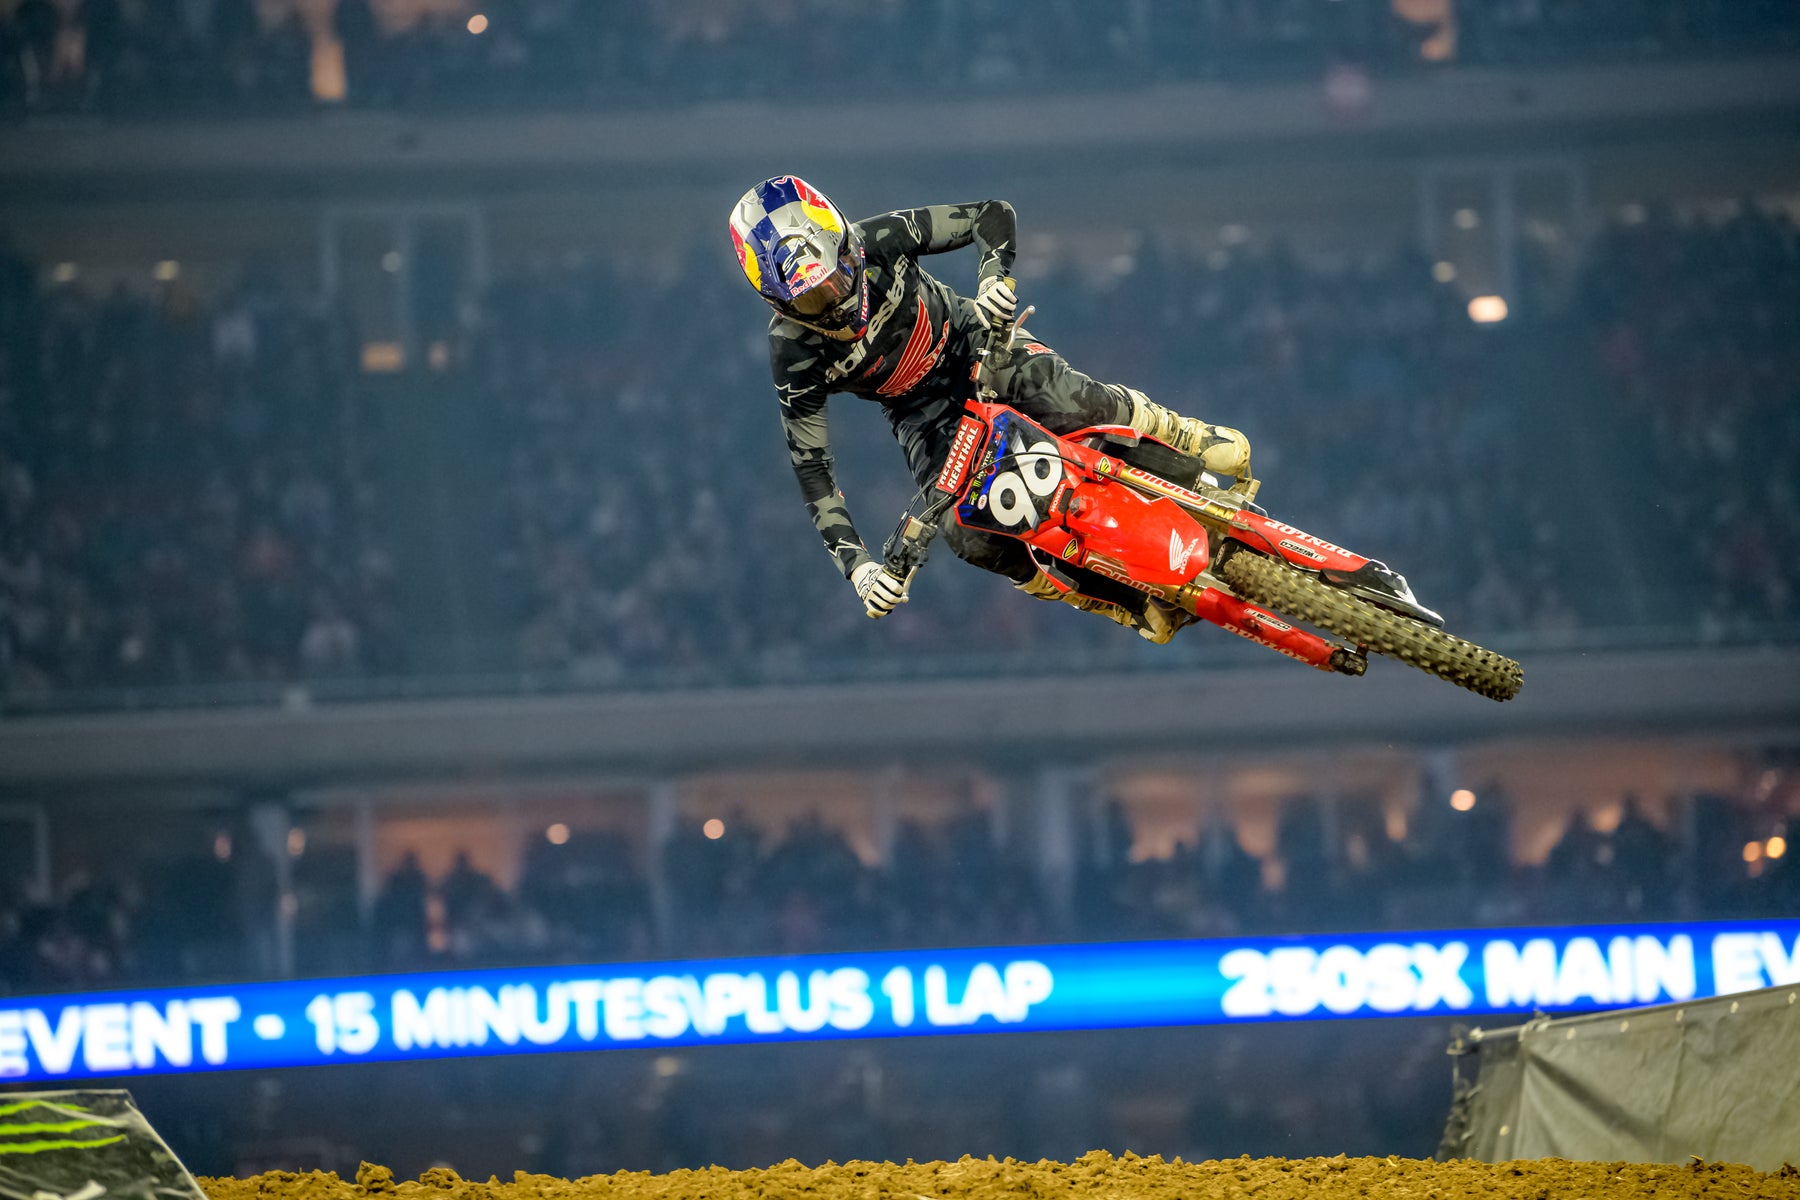 ALPINESTARS TOP FOUR LOCK-OUT AS HUNTER LAWRENCE IS VICTORIOUS IN 250SX EAST VICTORY IN HOUSTON